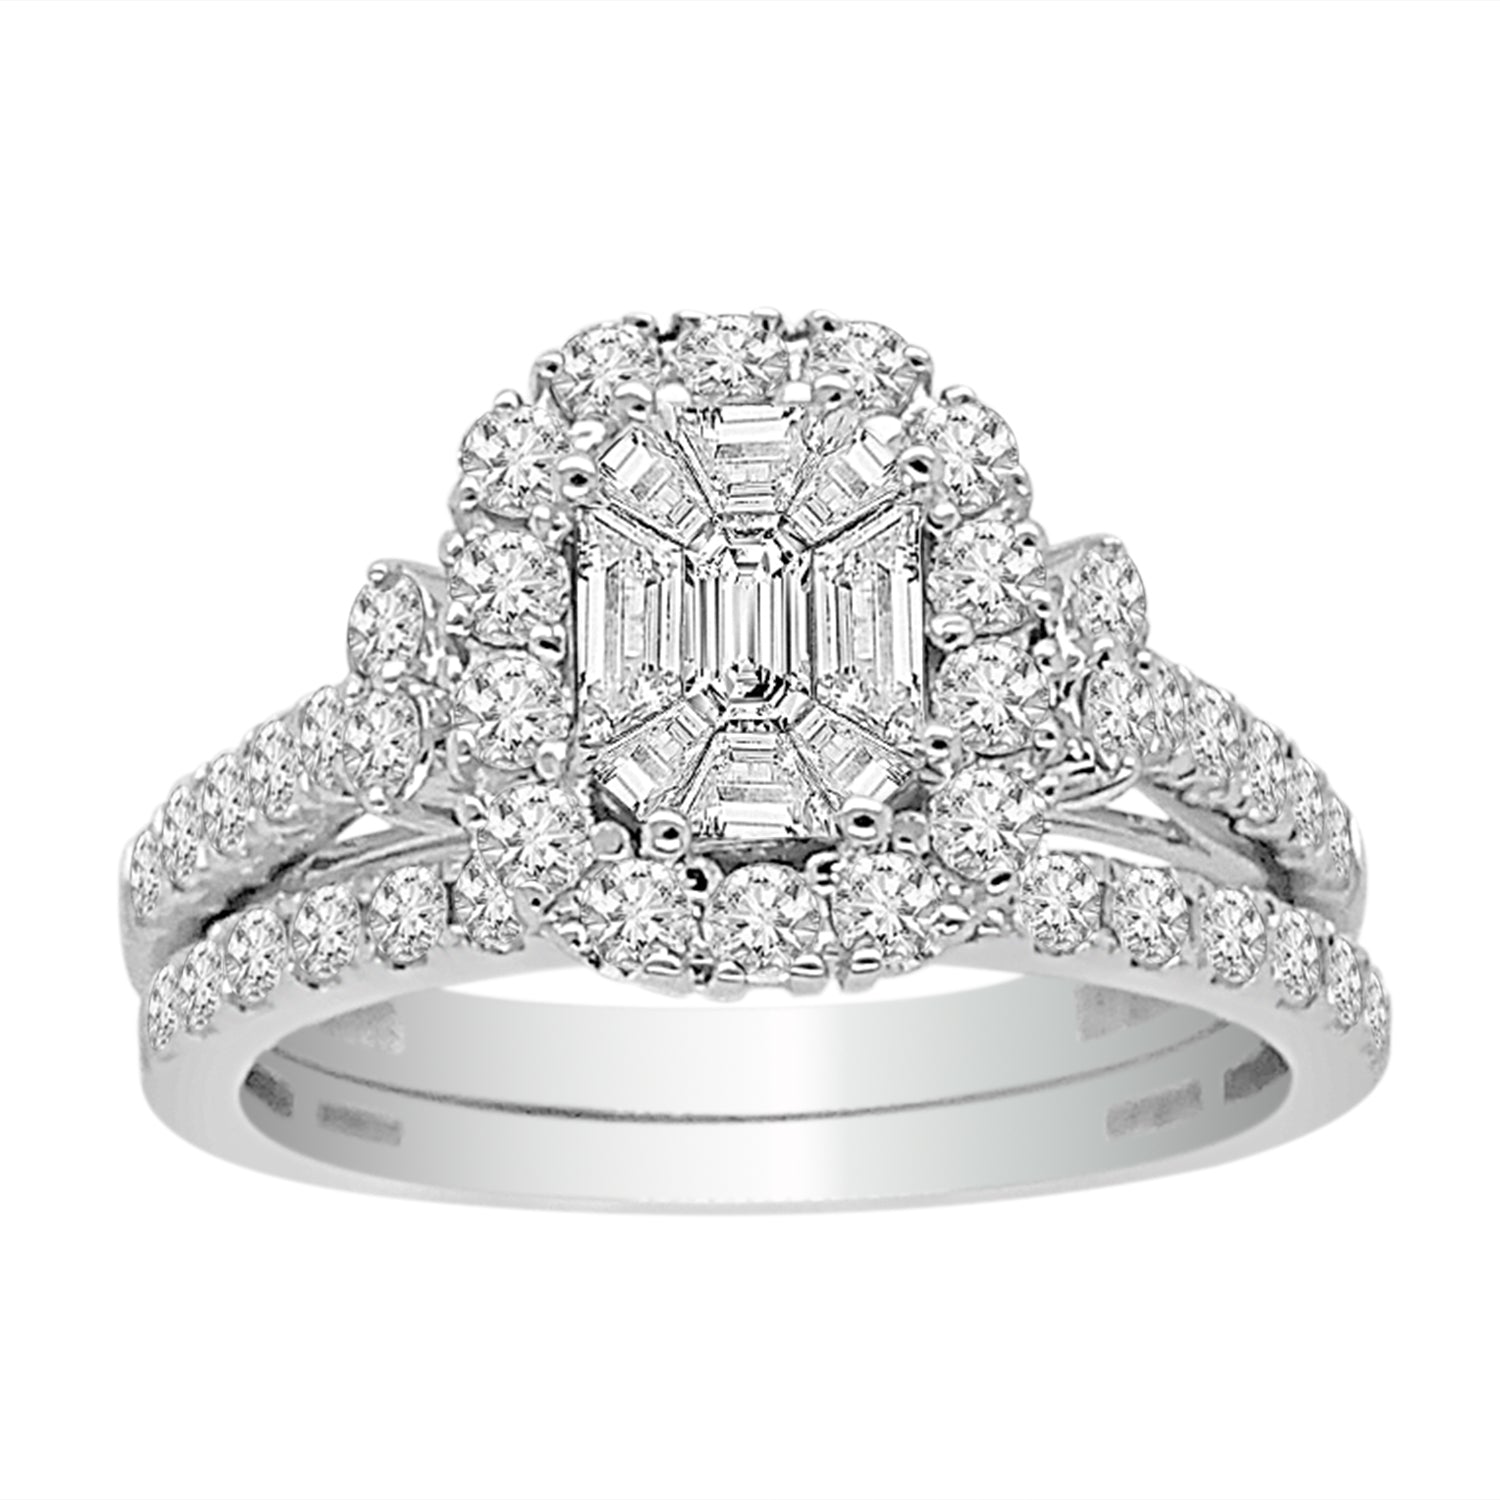 Fashion Halo Bridal Diamond Ring with Matching Band made in 18k White gold (Total diamond weight 1 1/4 carat)